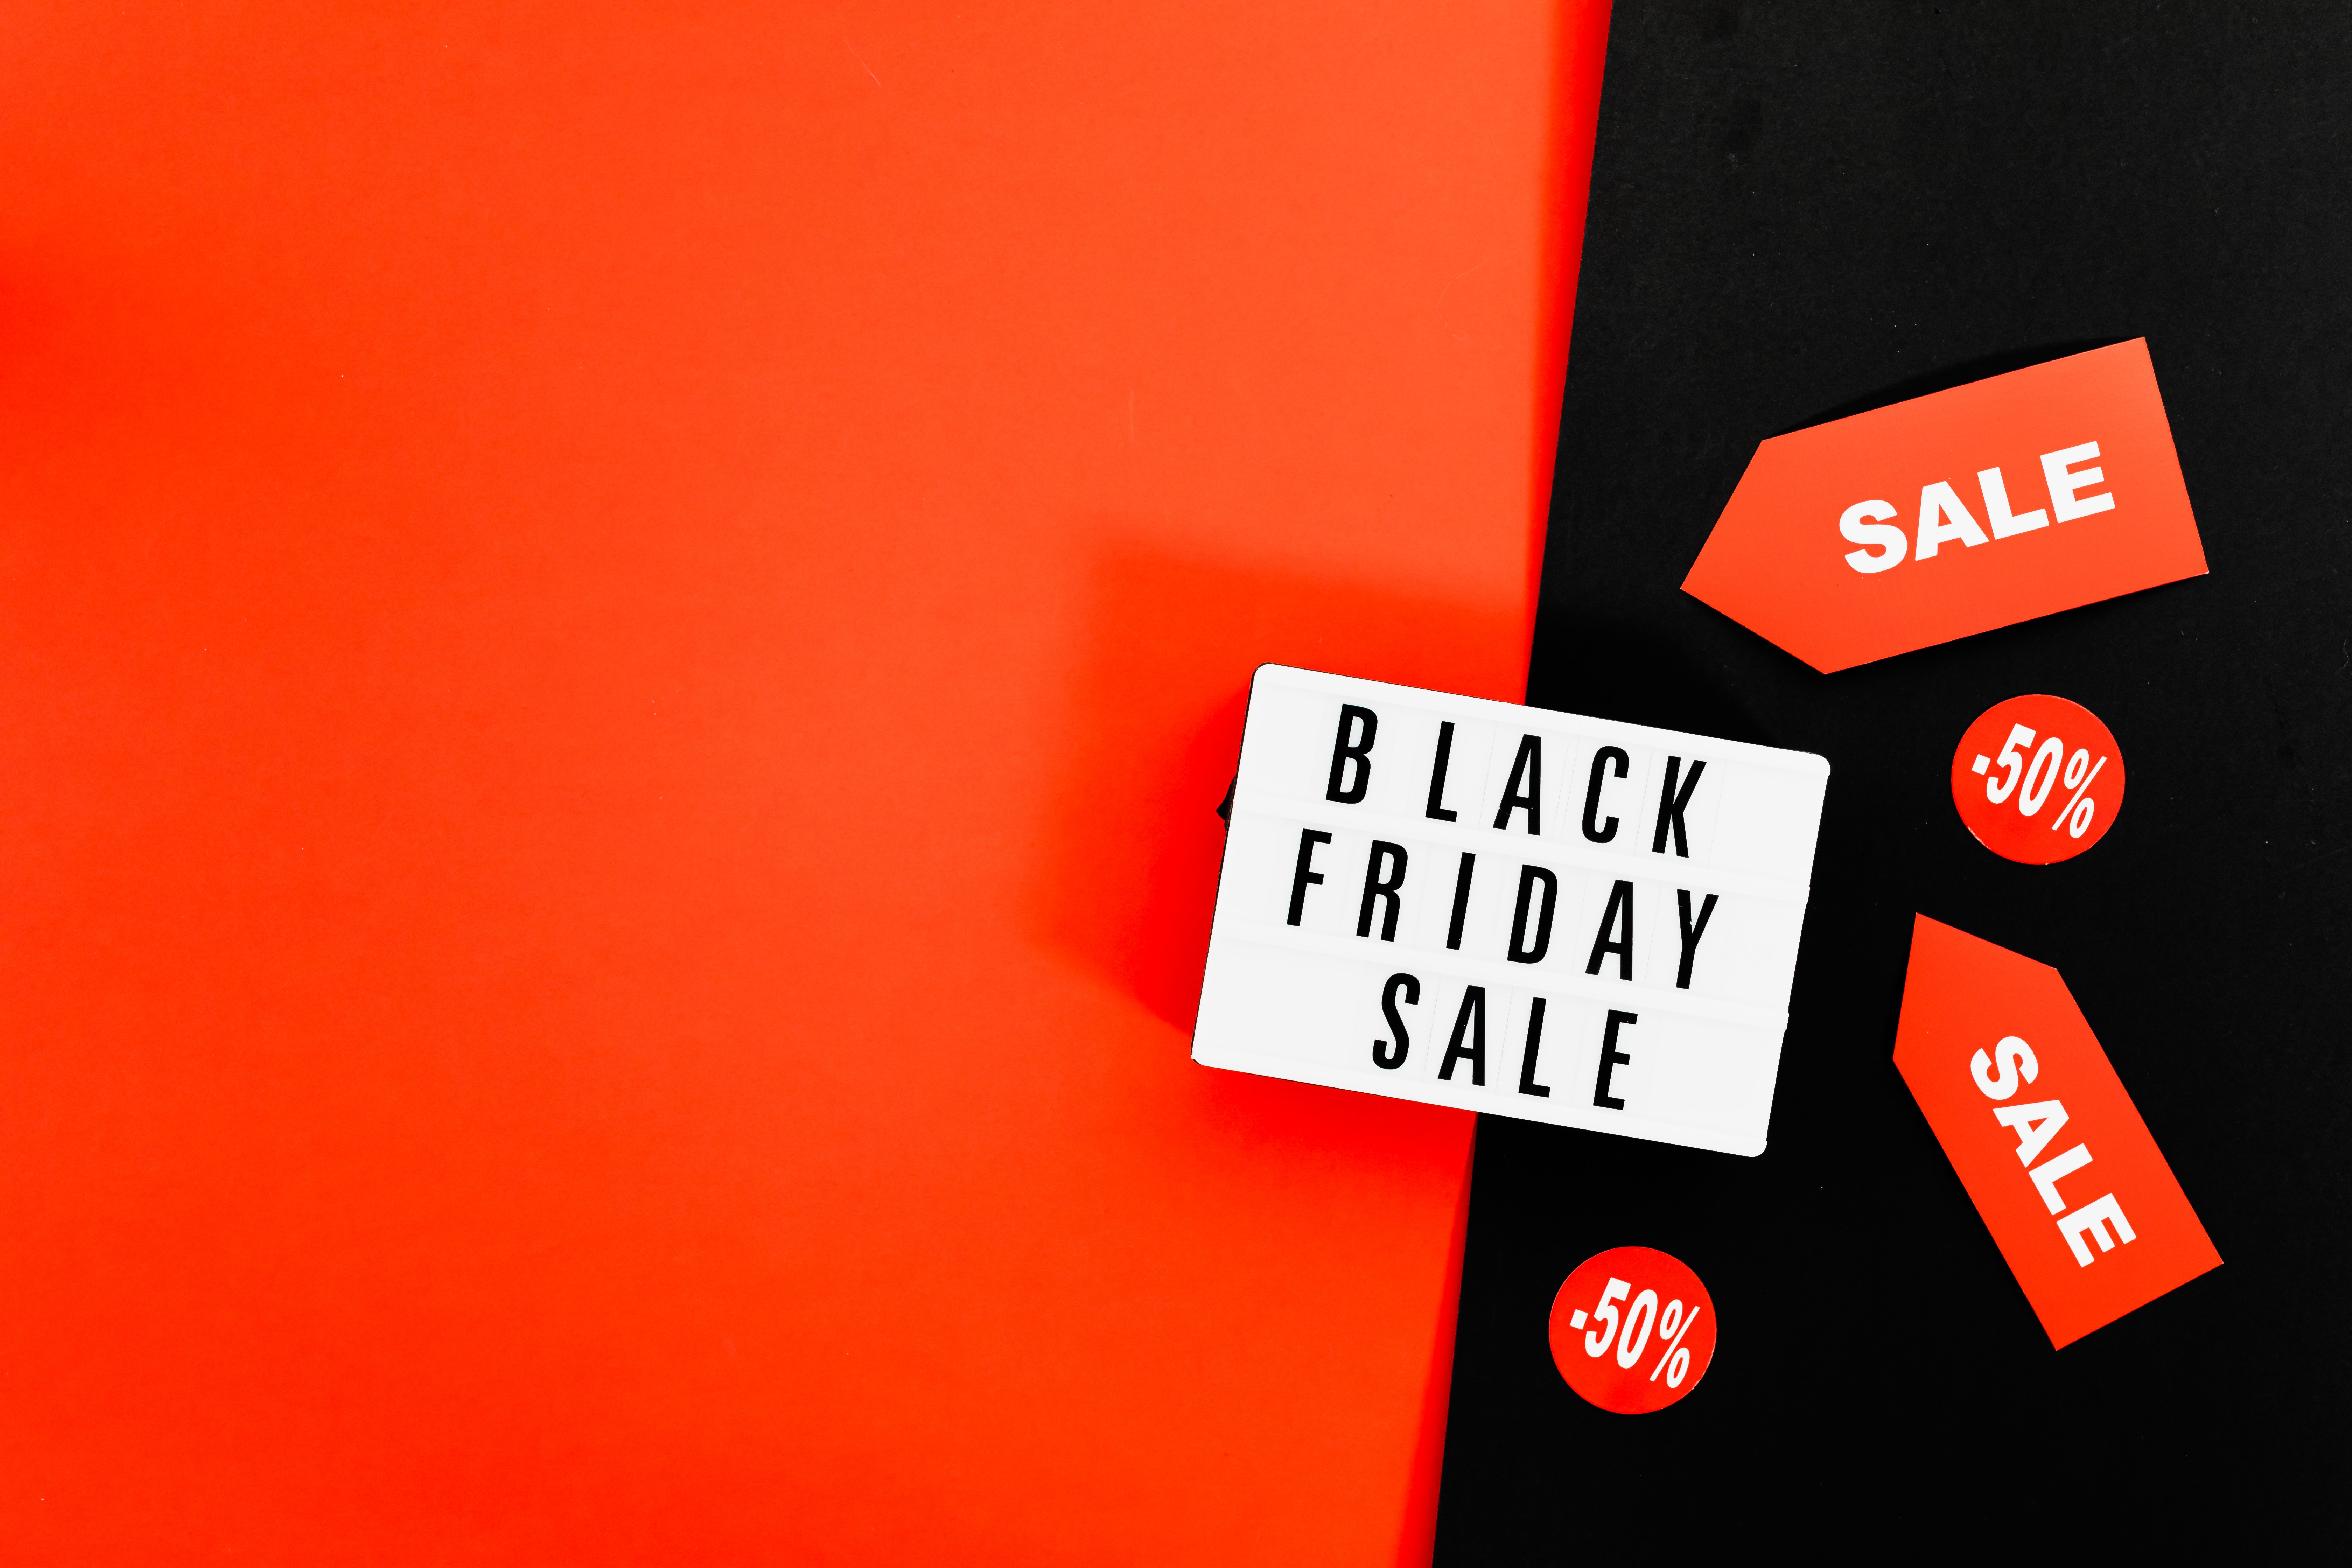 a-red-and-black-image-with-a-sign-on-the-front-advertising-black-friday-and-cyber-monday-sale-offers